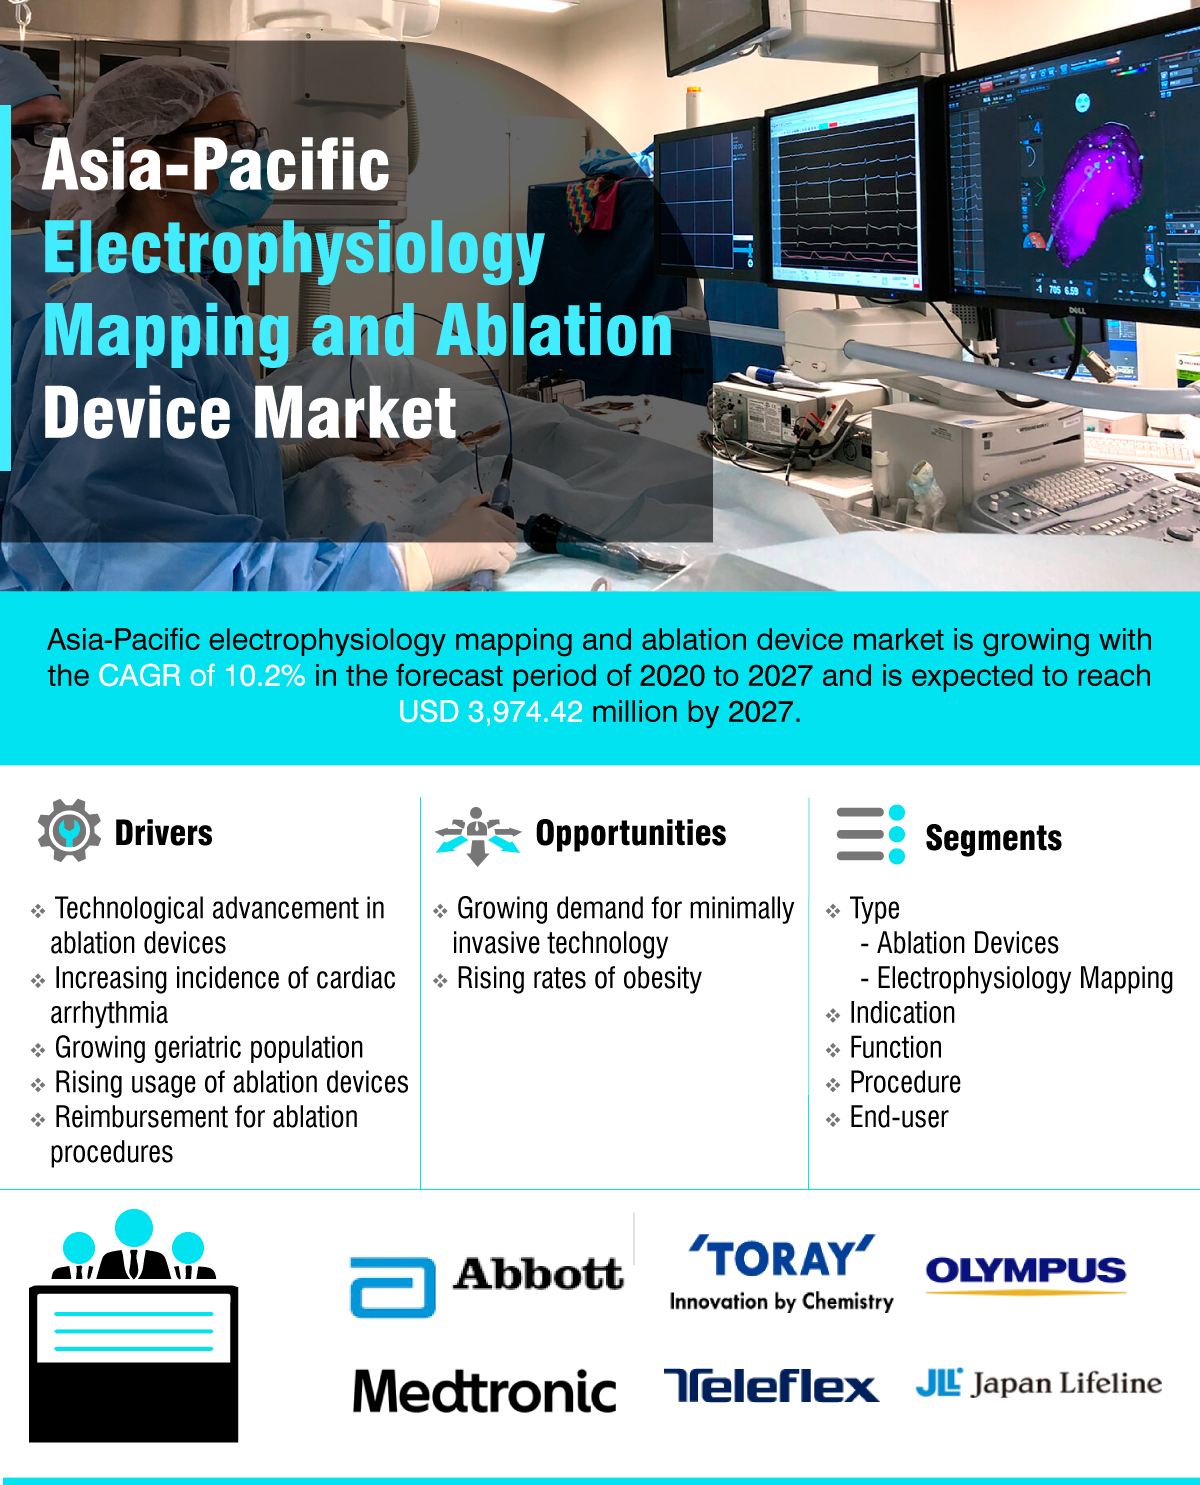 Asia-Pacific Electrophysiology Mapping and Ablation Devices Market